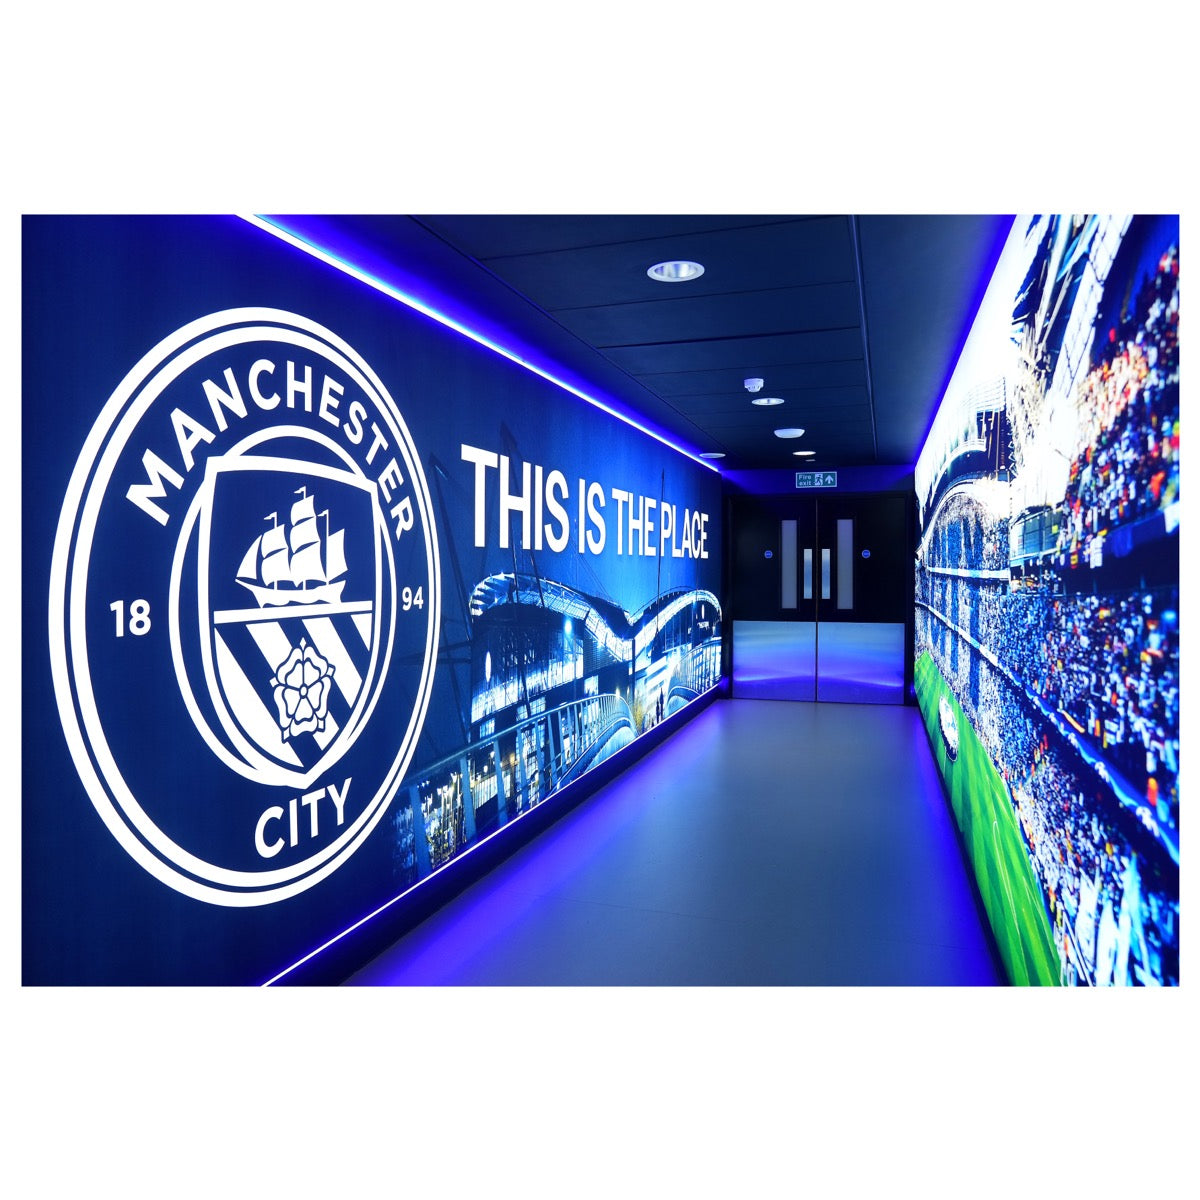 Manchester City FC - Inside Stadium This Is The Place Full Wall Mural